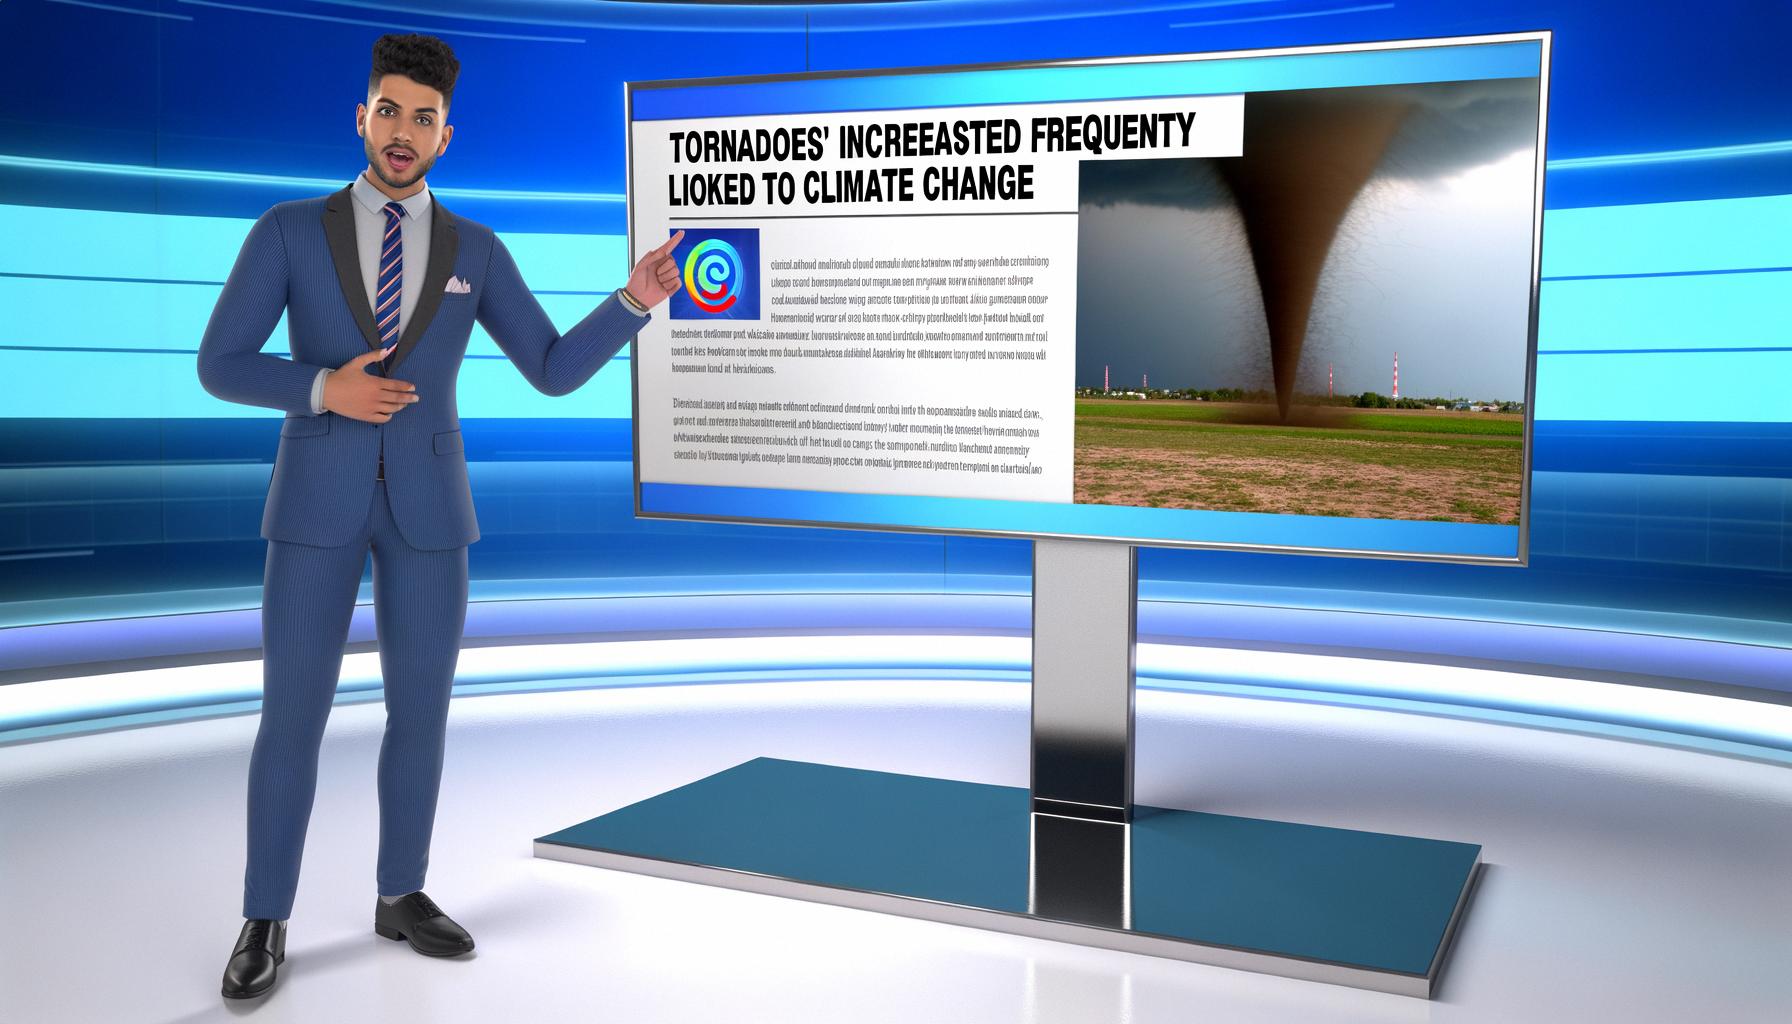 Tornadoes' increased frequency linked to climate change Balanced News